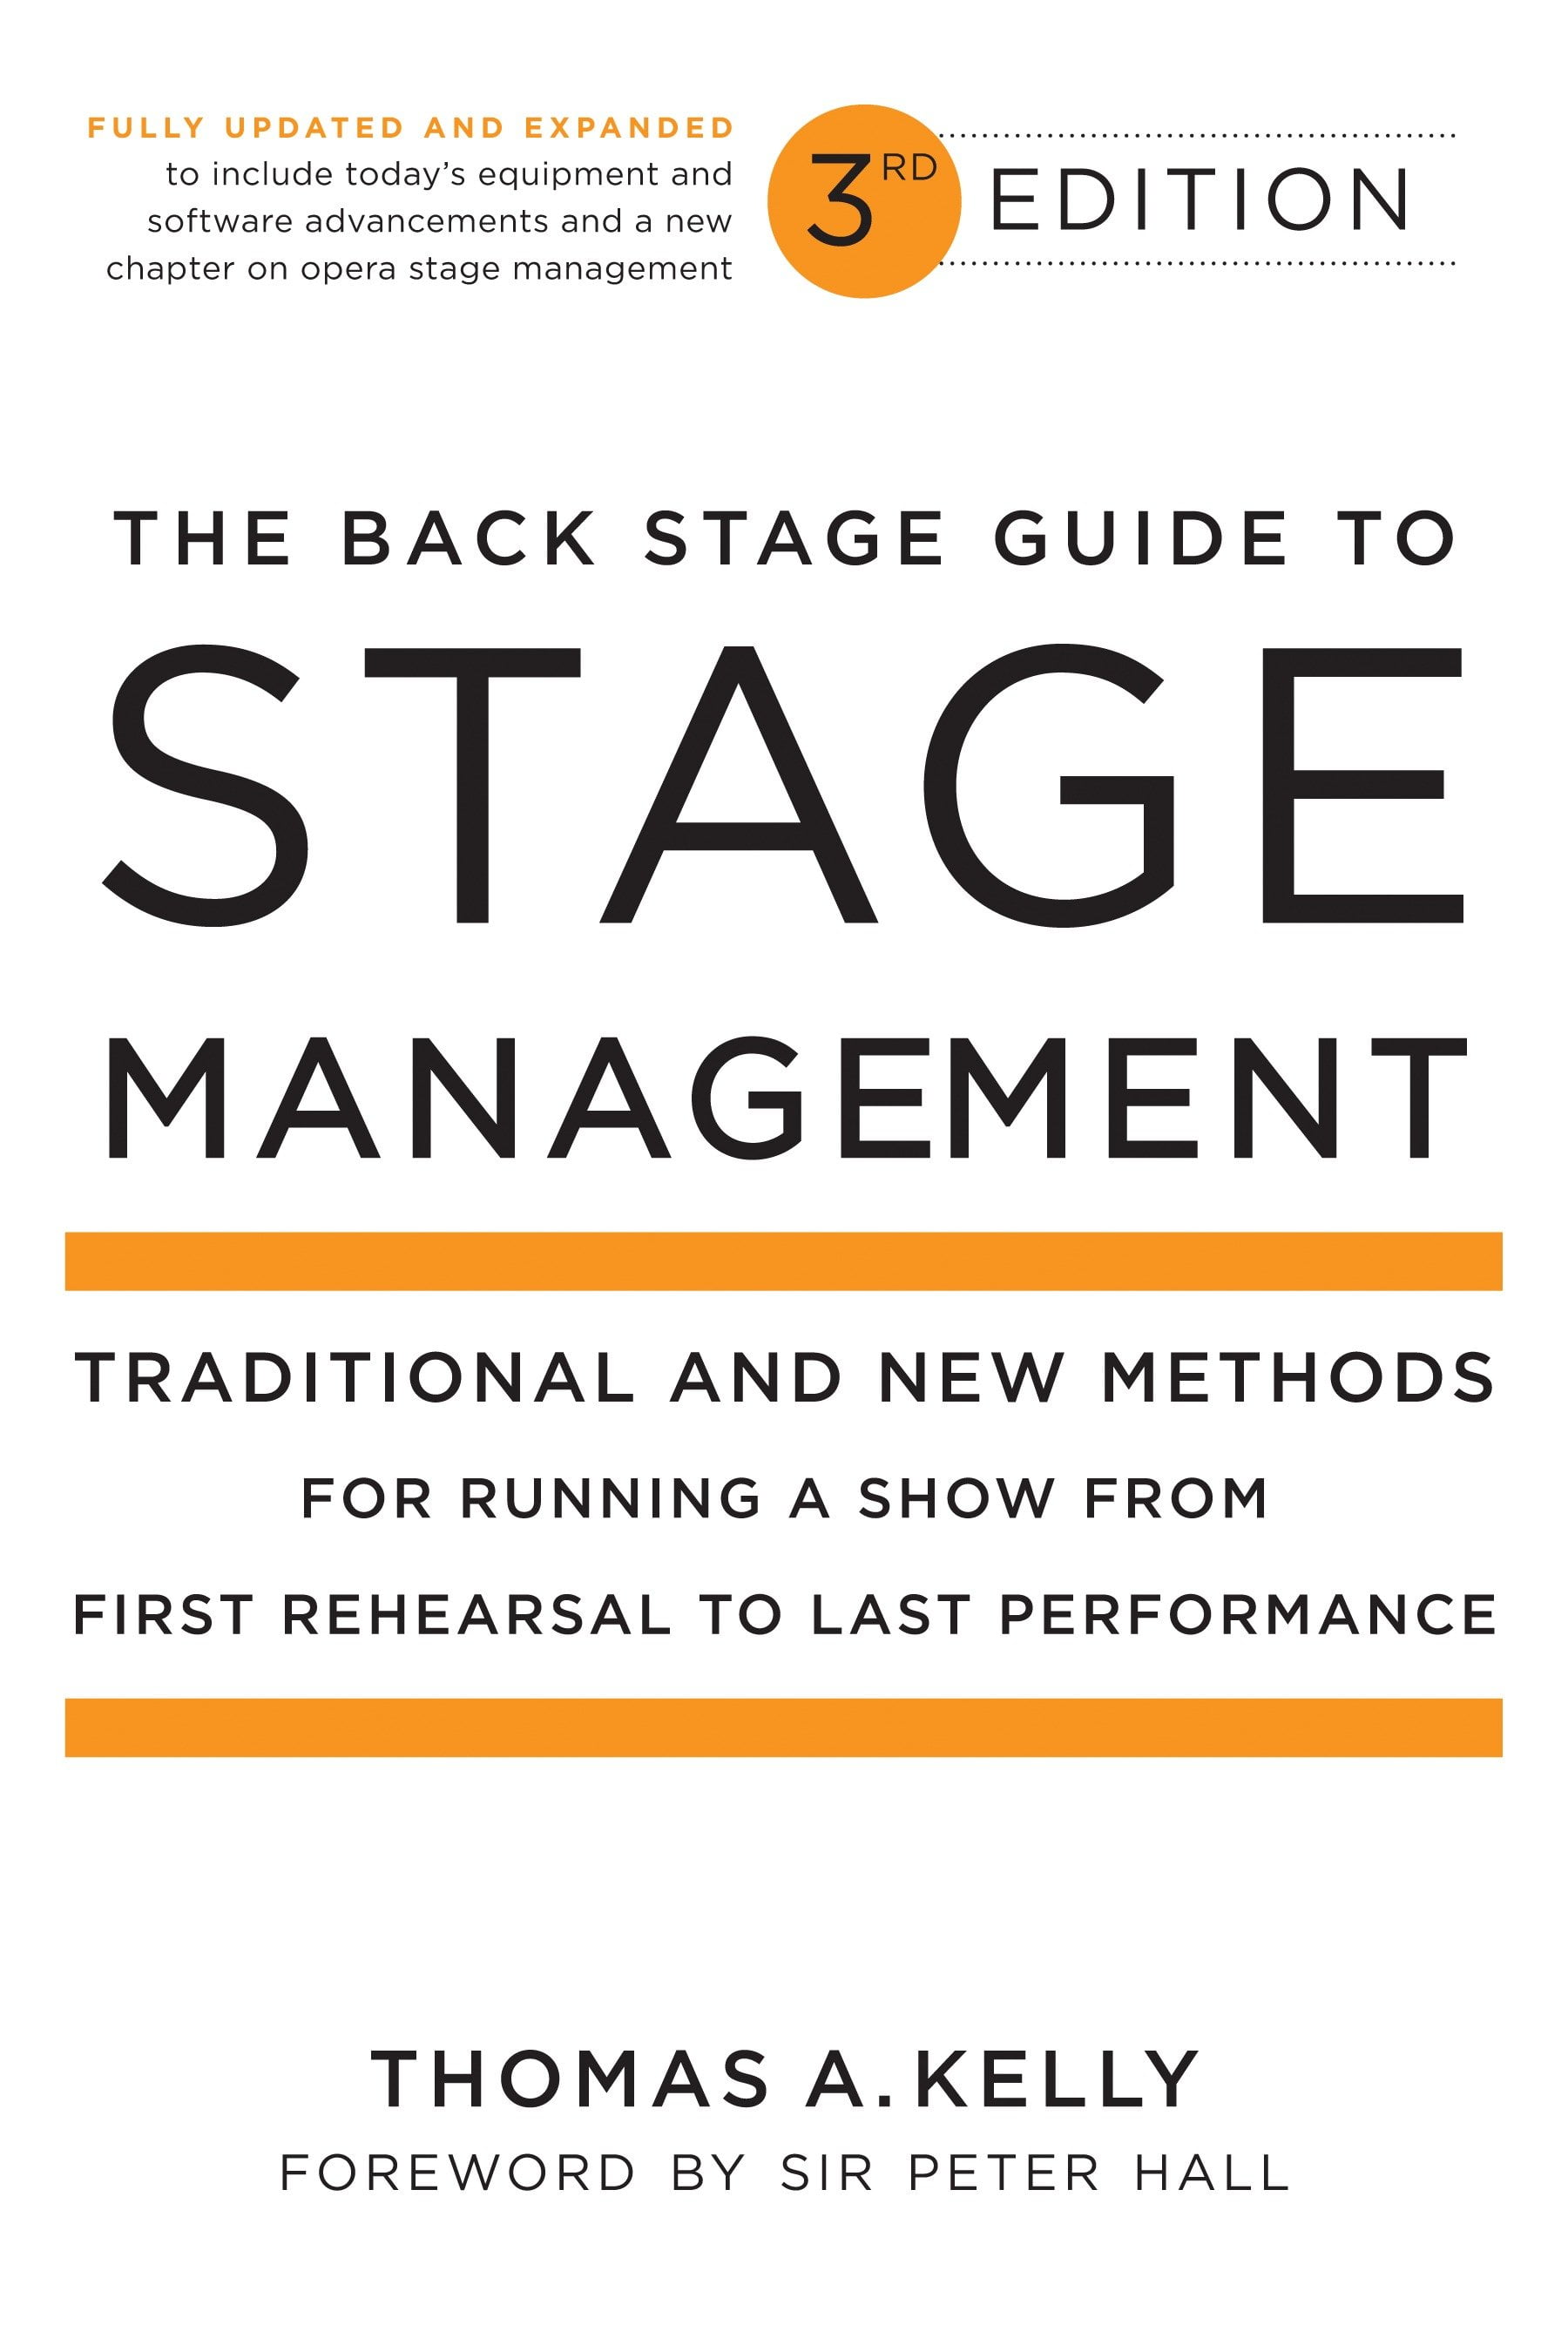 The Back Stage Guide to Stage Management 3rd Edition Traditional and New Methods for Running a Show from First Rehearsal to Last Performance